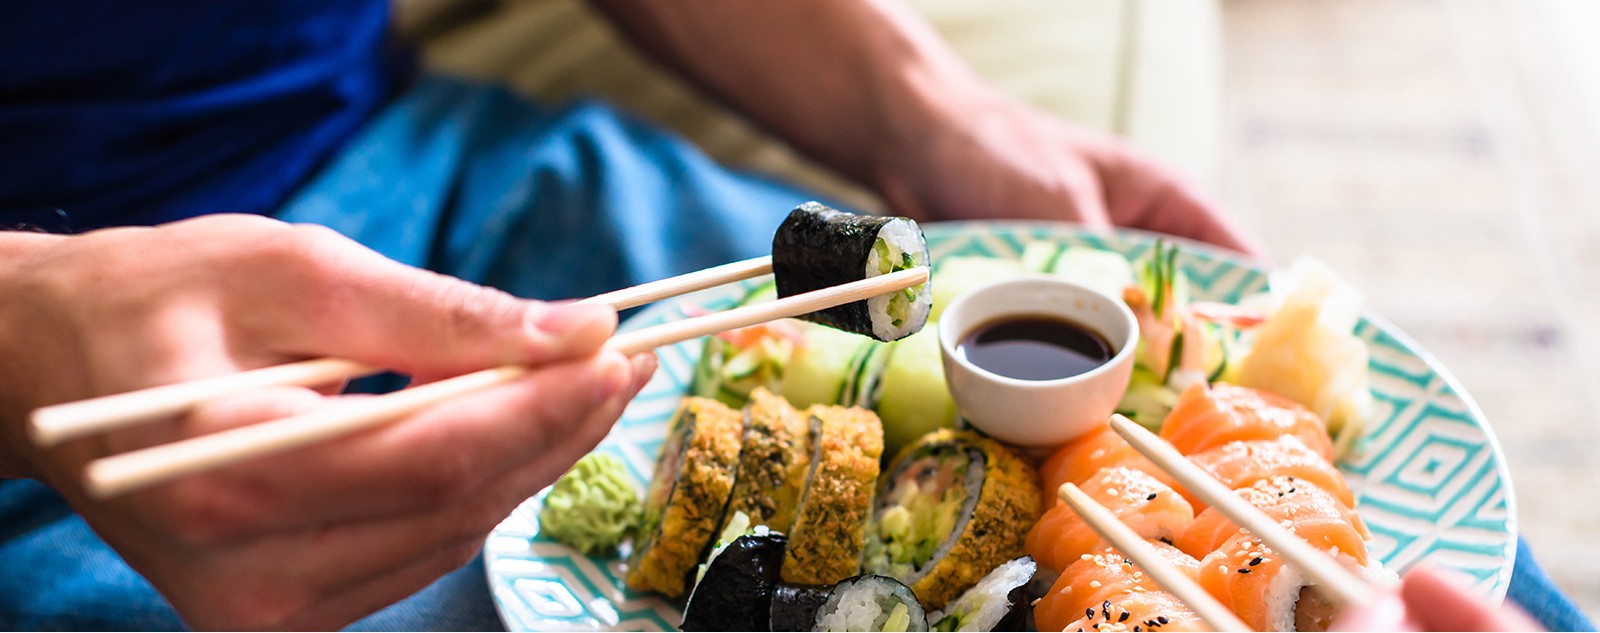 Japanese diet and other traditional diets high in fish consumption